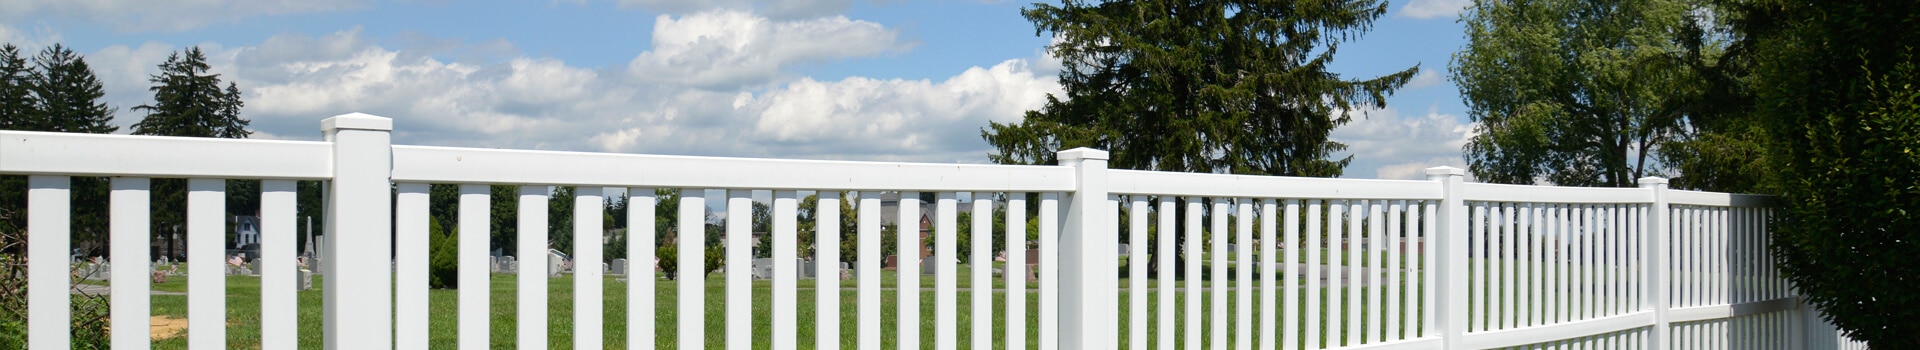 Privacy Fence Panel - Big Easy Fences